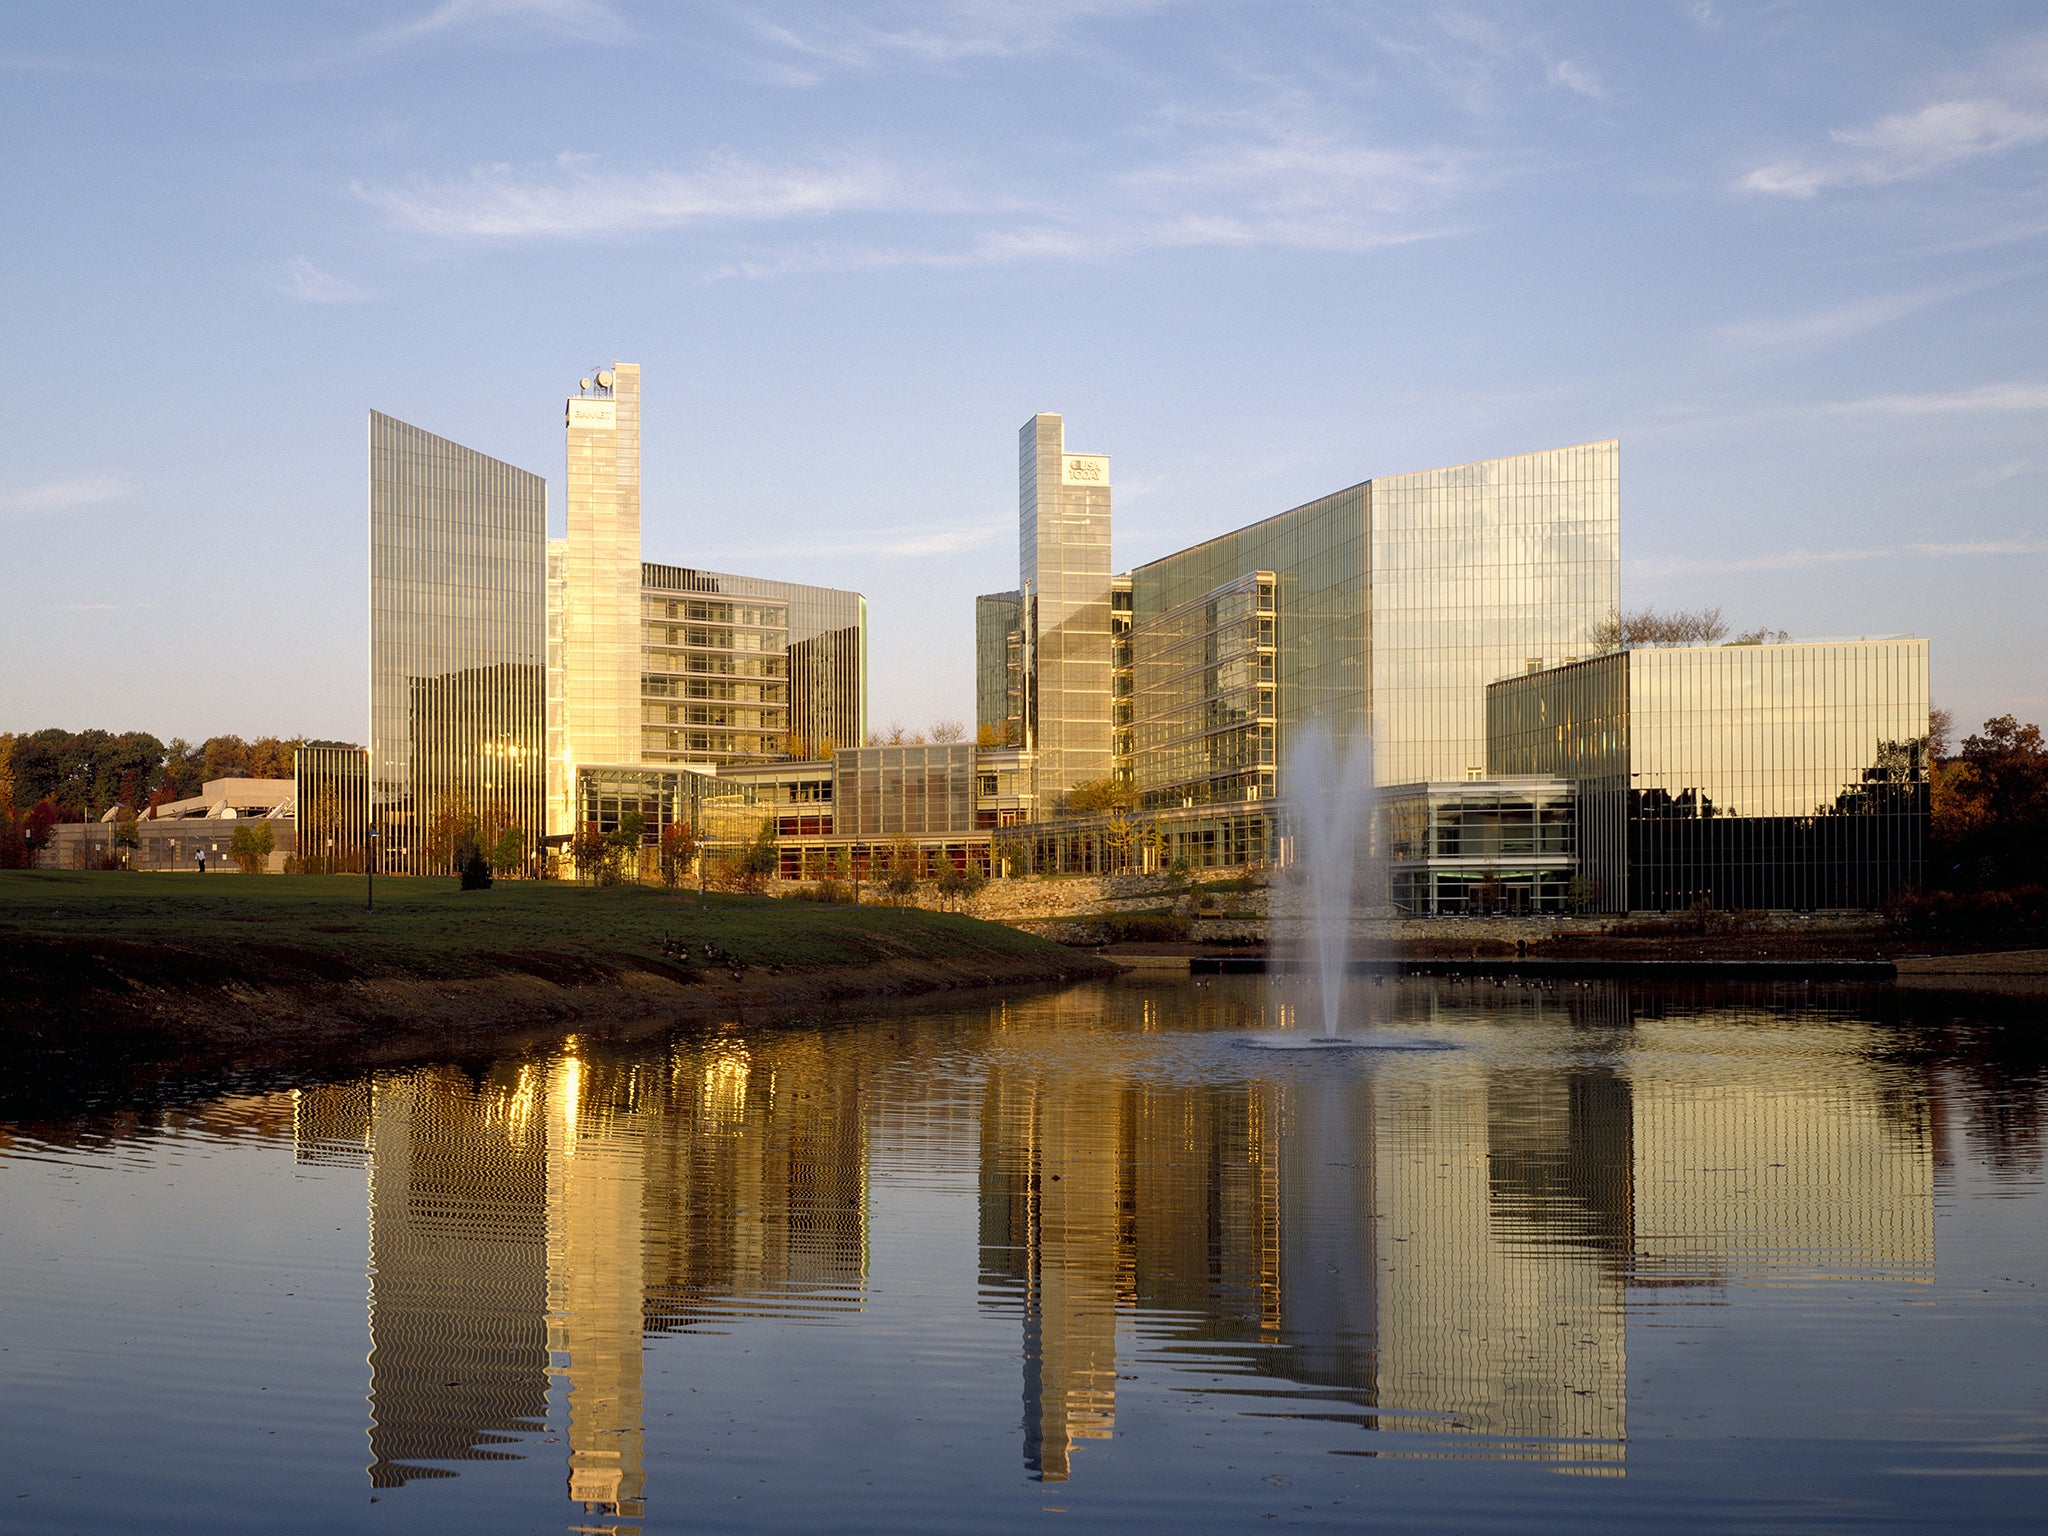 The Gannett-USA Today headquarters in Arlington County, Virginia, is another of KPF’s designs